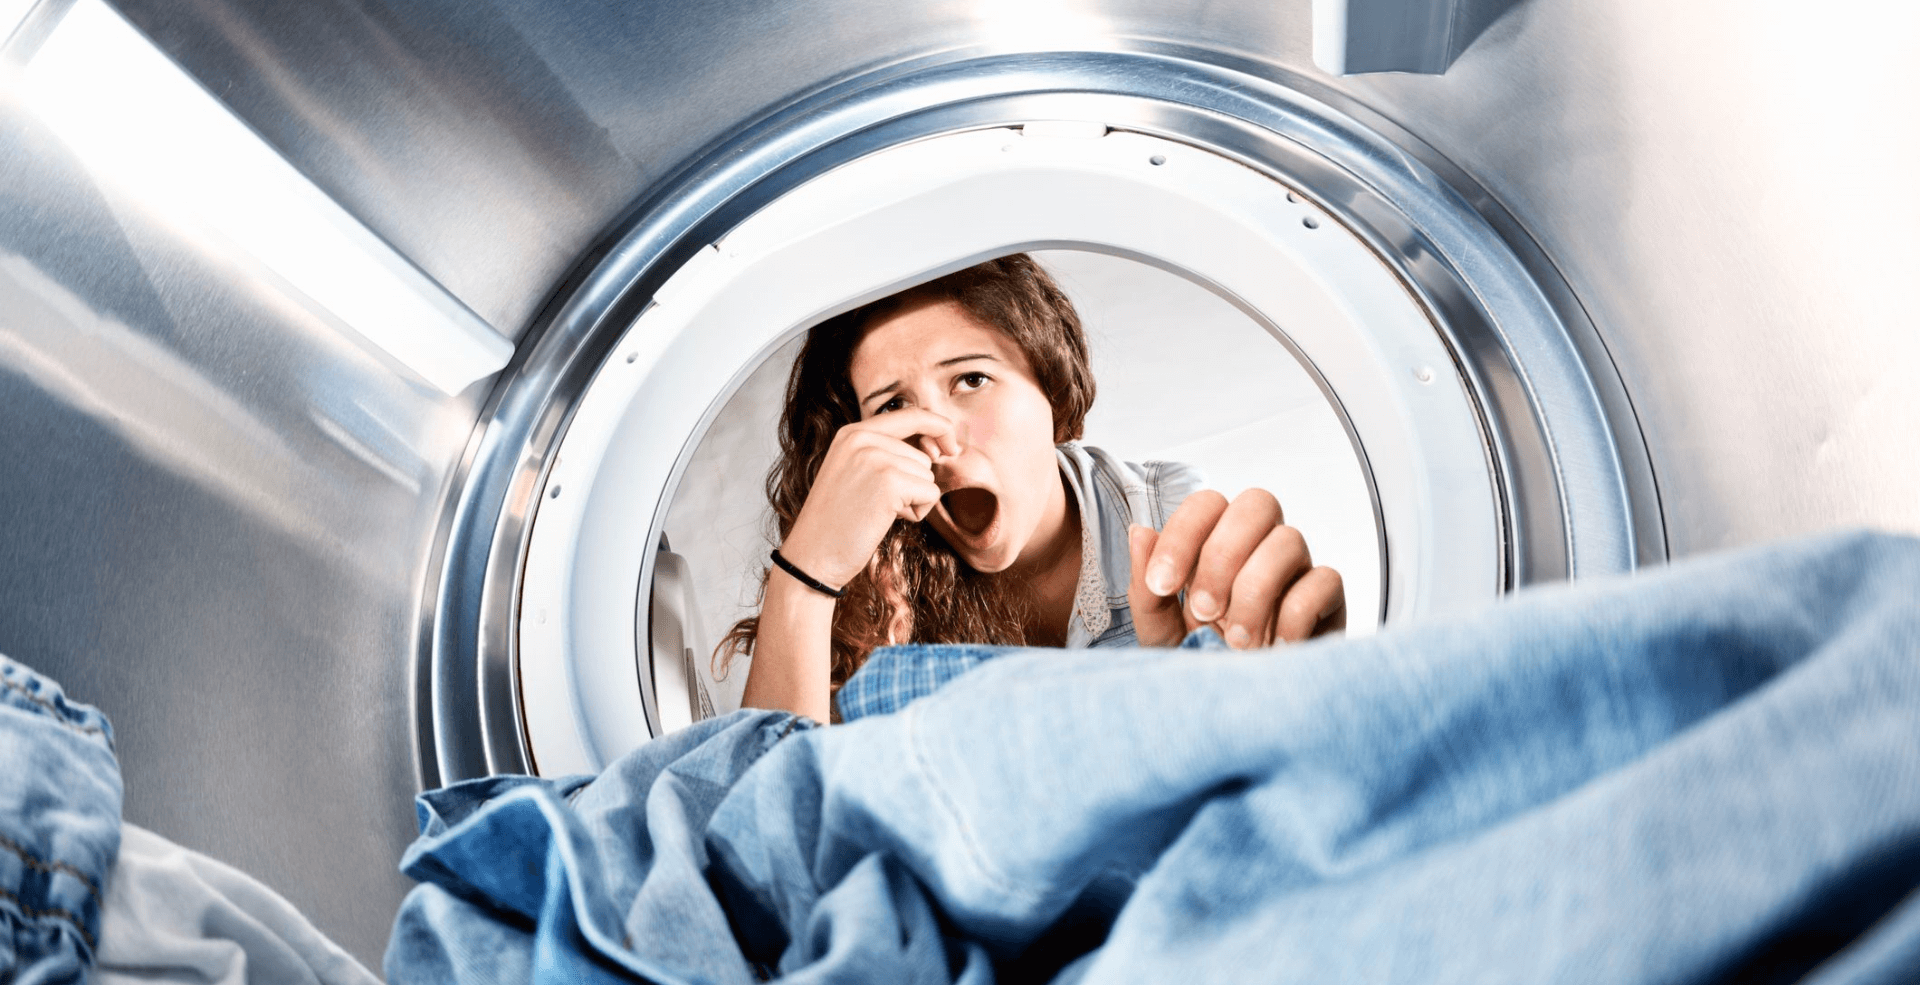 How to Naturally Get Your Washing Machine Immaculate